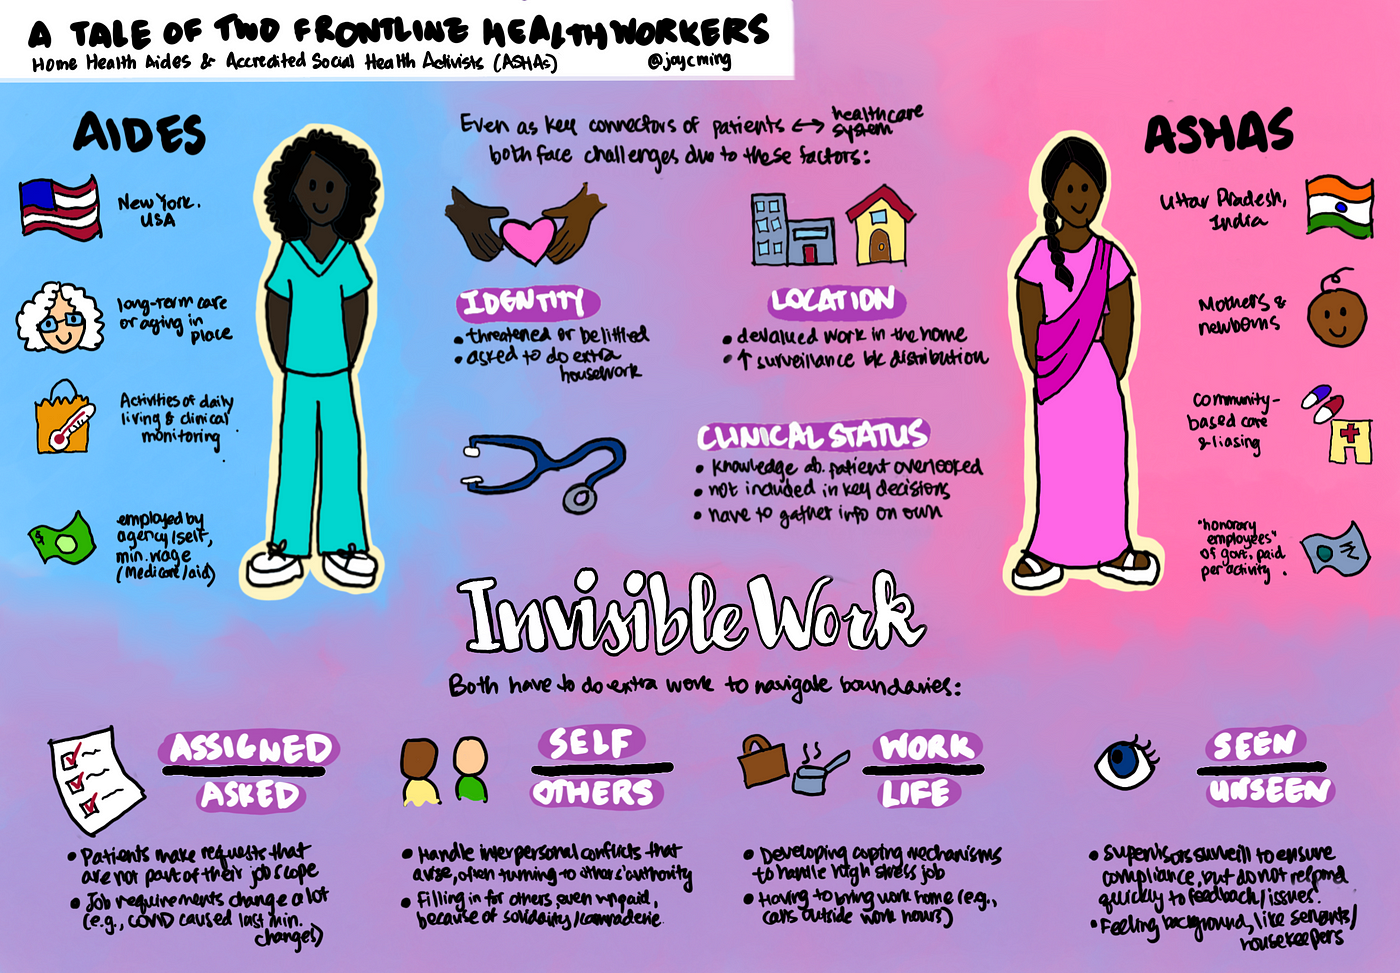 Visual summary of commonalities and differences of two frontline health workers. Please refer to the linked blogpost for a full transcription of the text in the image.